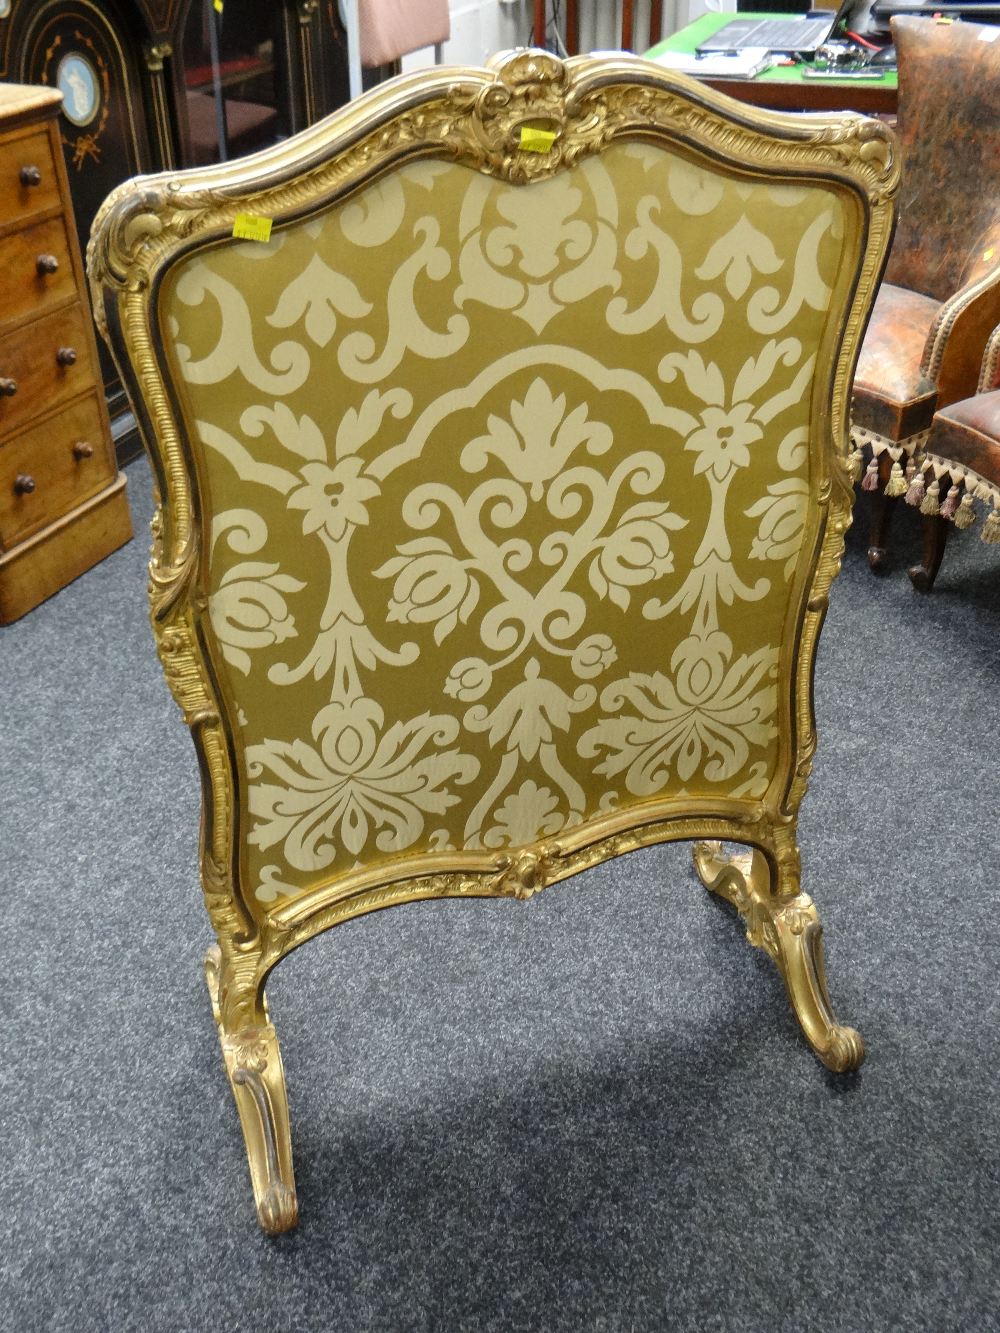 A Rococo style gilded & ebonized carved fire screen with double-side silk fabric panel